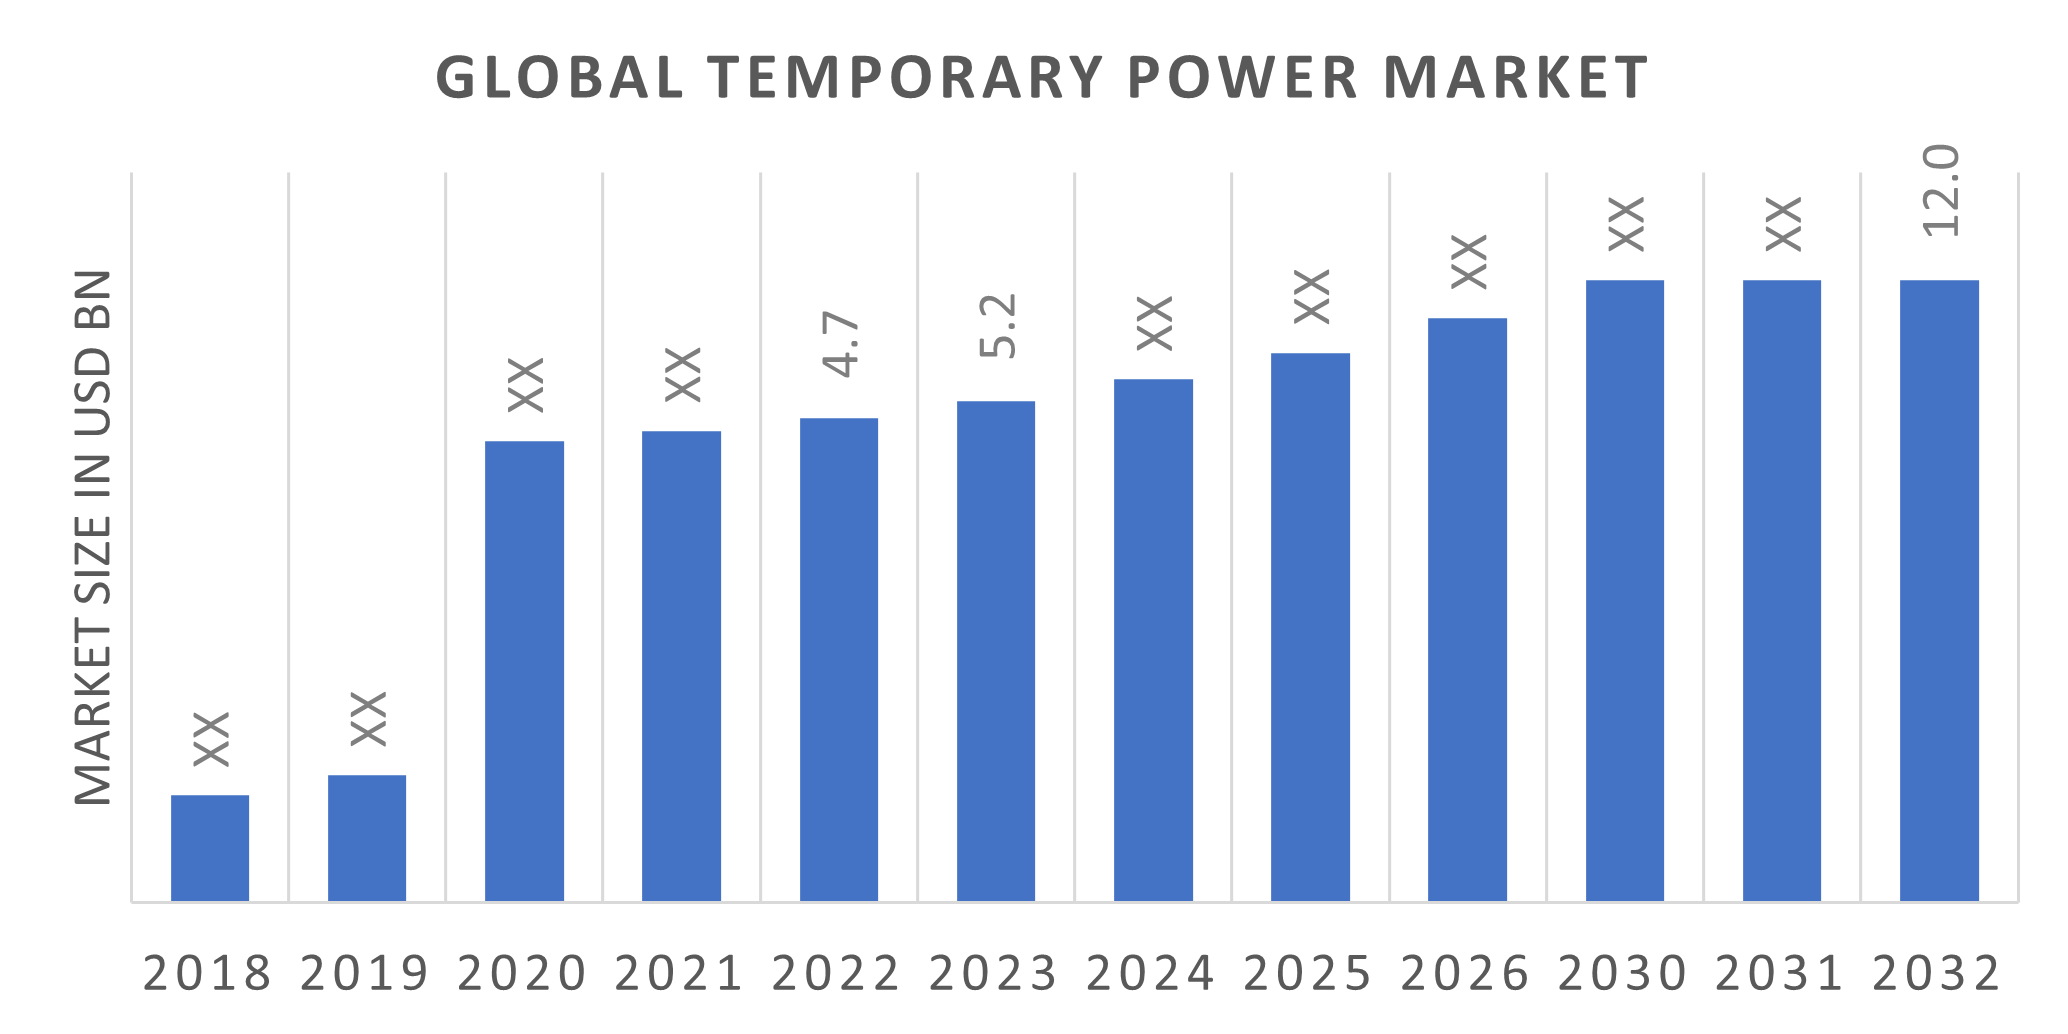 Global Temporary Power Market Overview